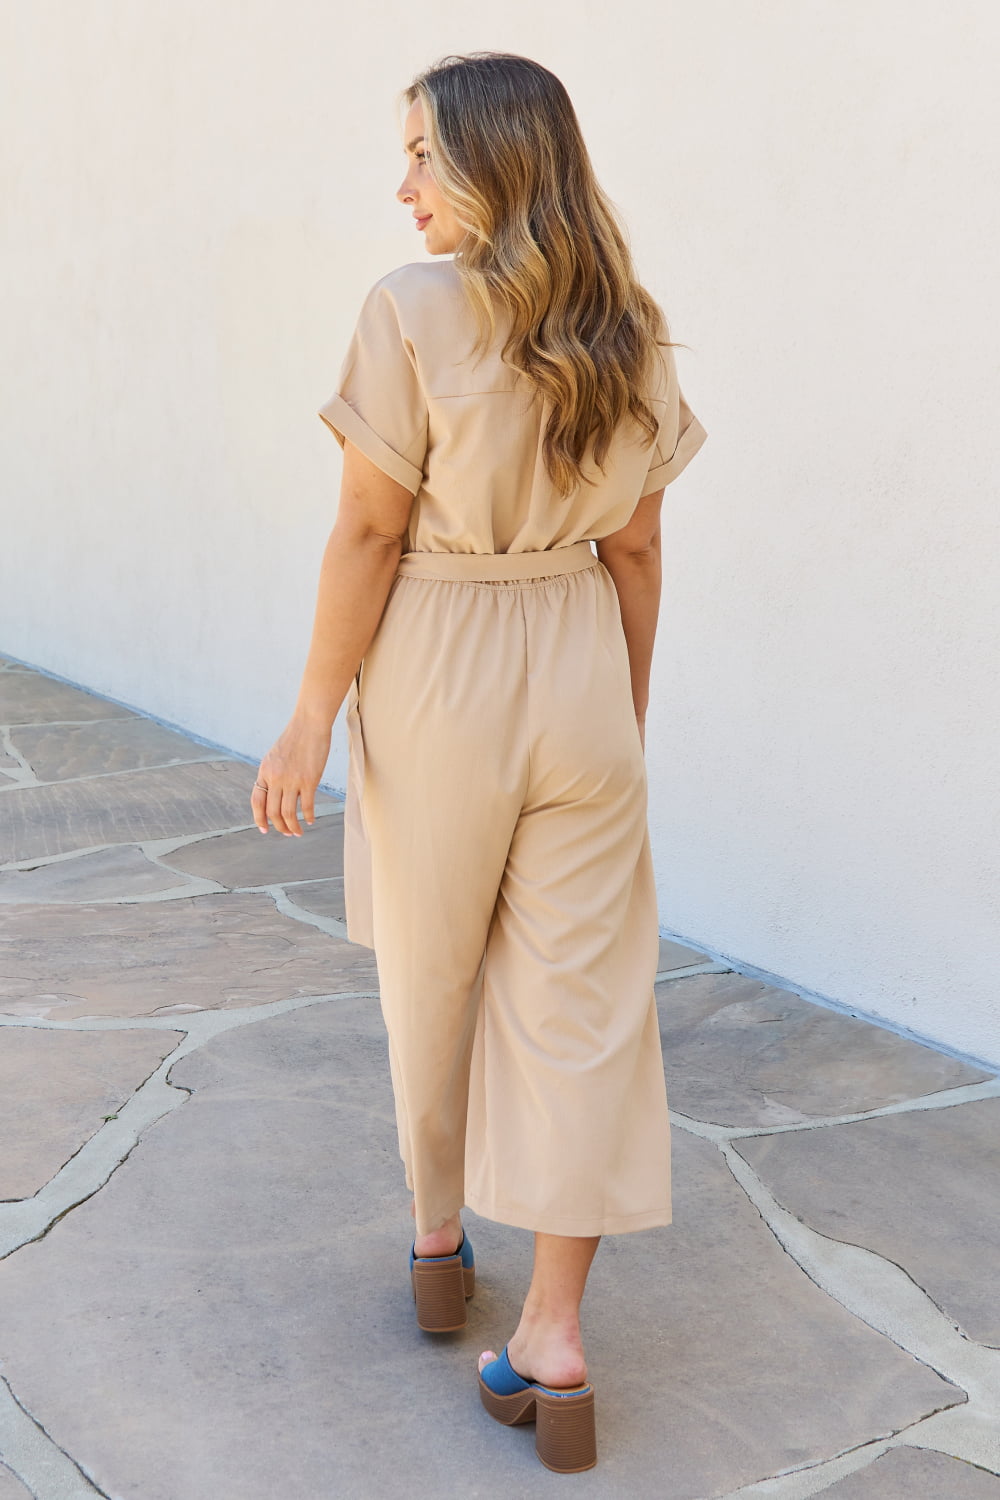 Petal Dew All In One Full Size Solid Jumpsuit - Online Only